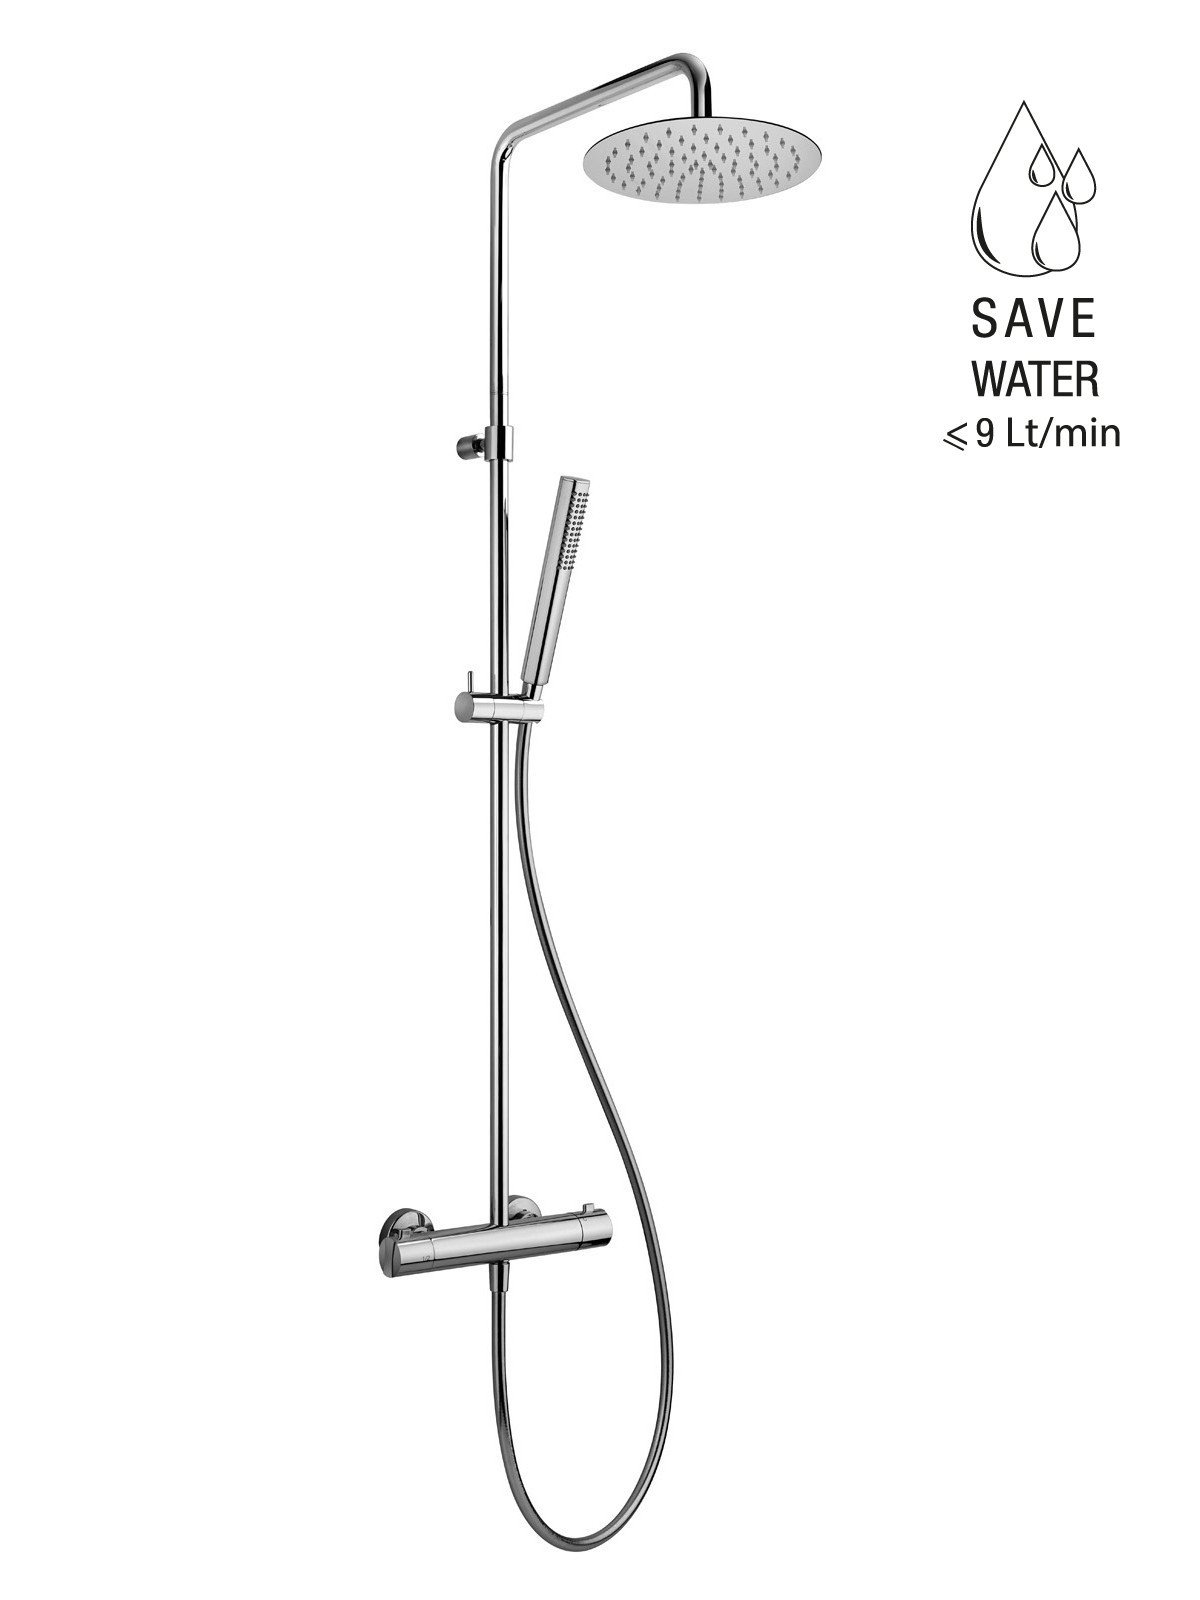 External thermostatic anticalcareous shower mixer, cold body